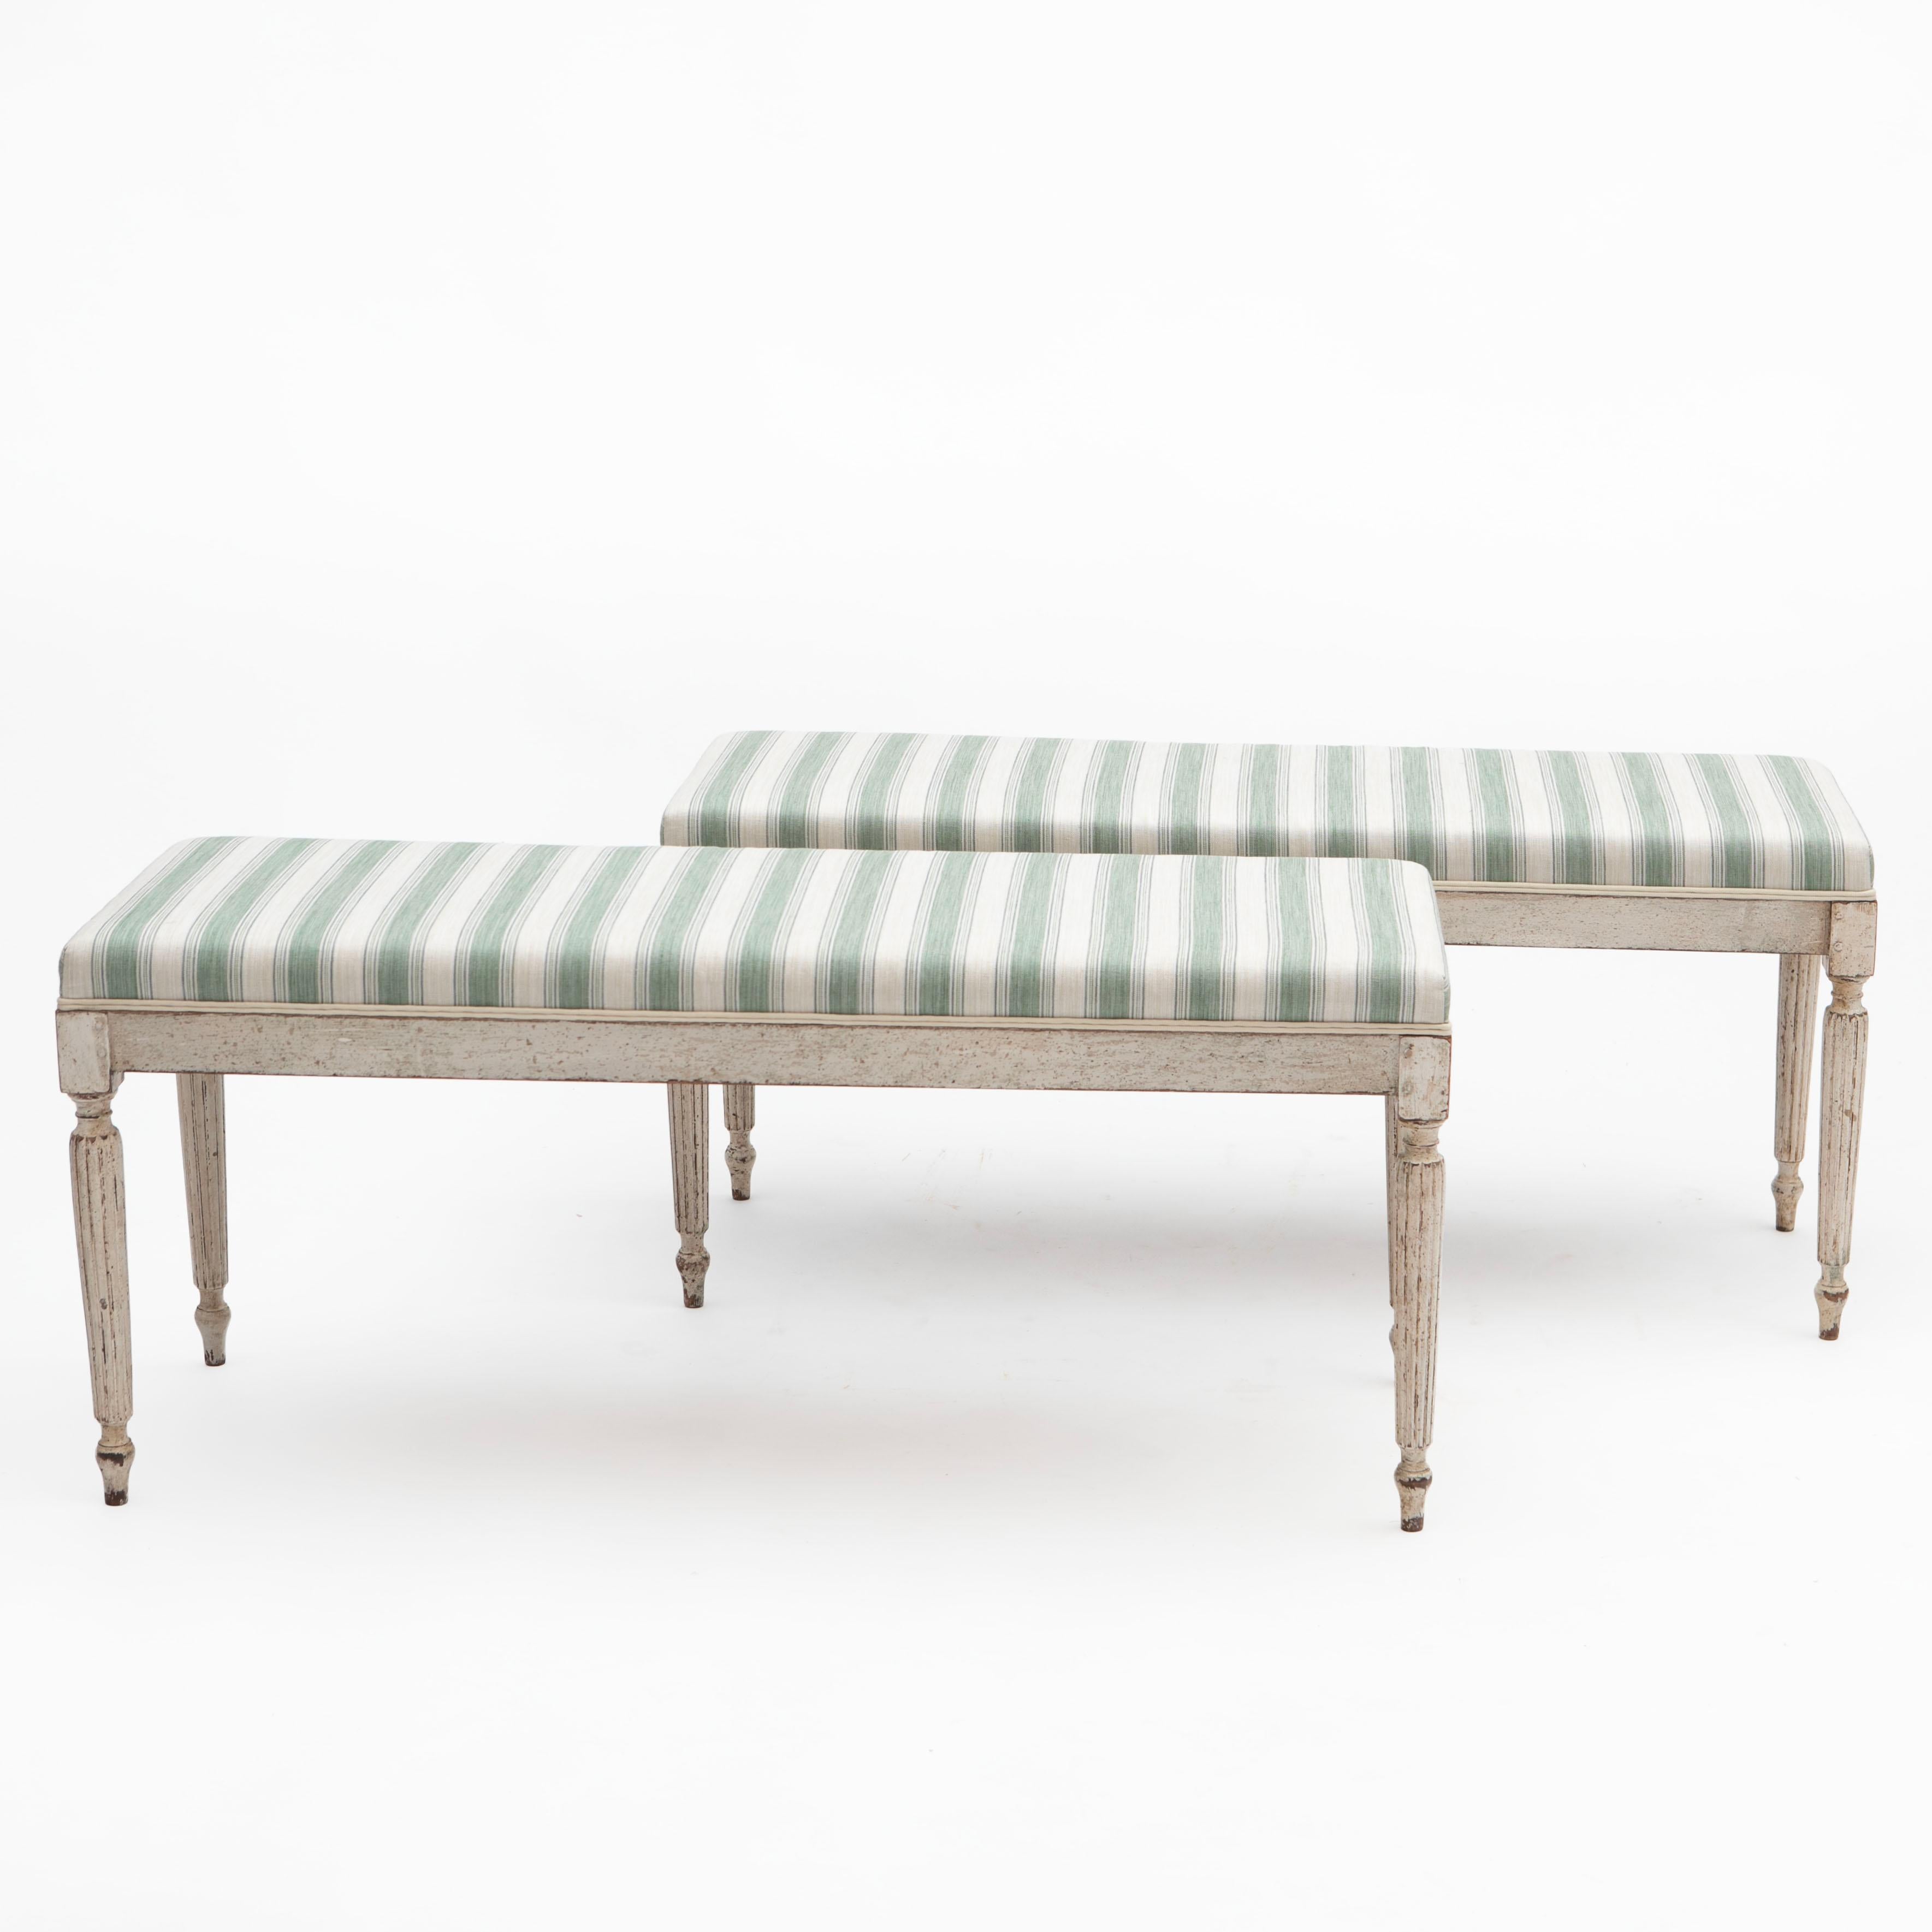 A pair (set of 2) benches in Louis XVI style.
Frame in white-painted wood, seats newly upholstered with striped linen blend in shades of green (Forest Green) from Colefax & Fowler.
Resting on 4 reeded legs with flutings.
Denmark circa 1900
Sold as a